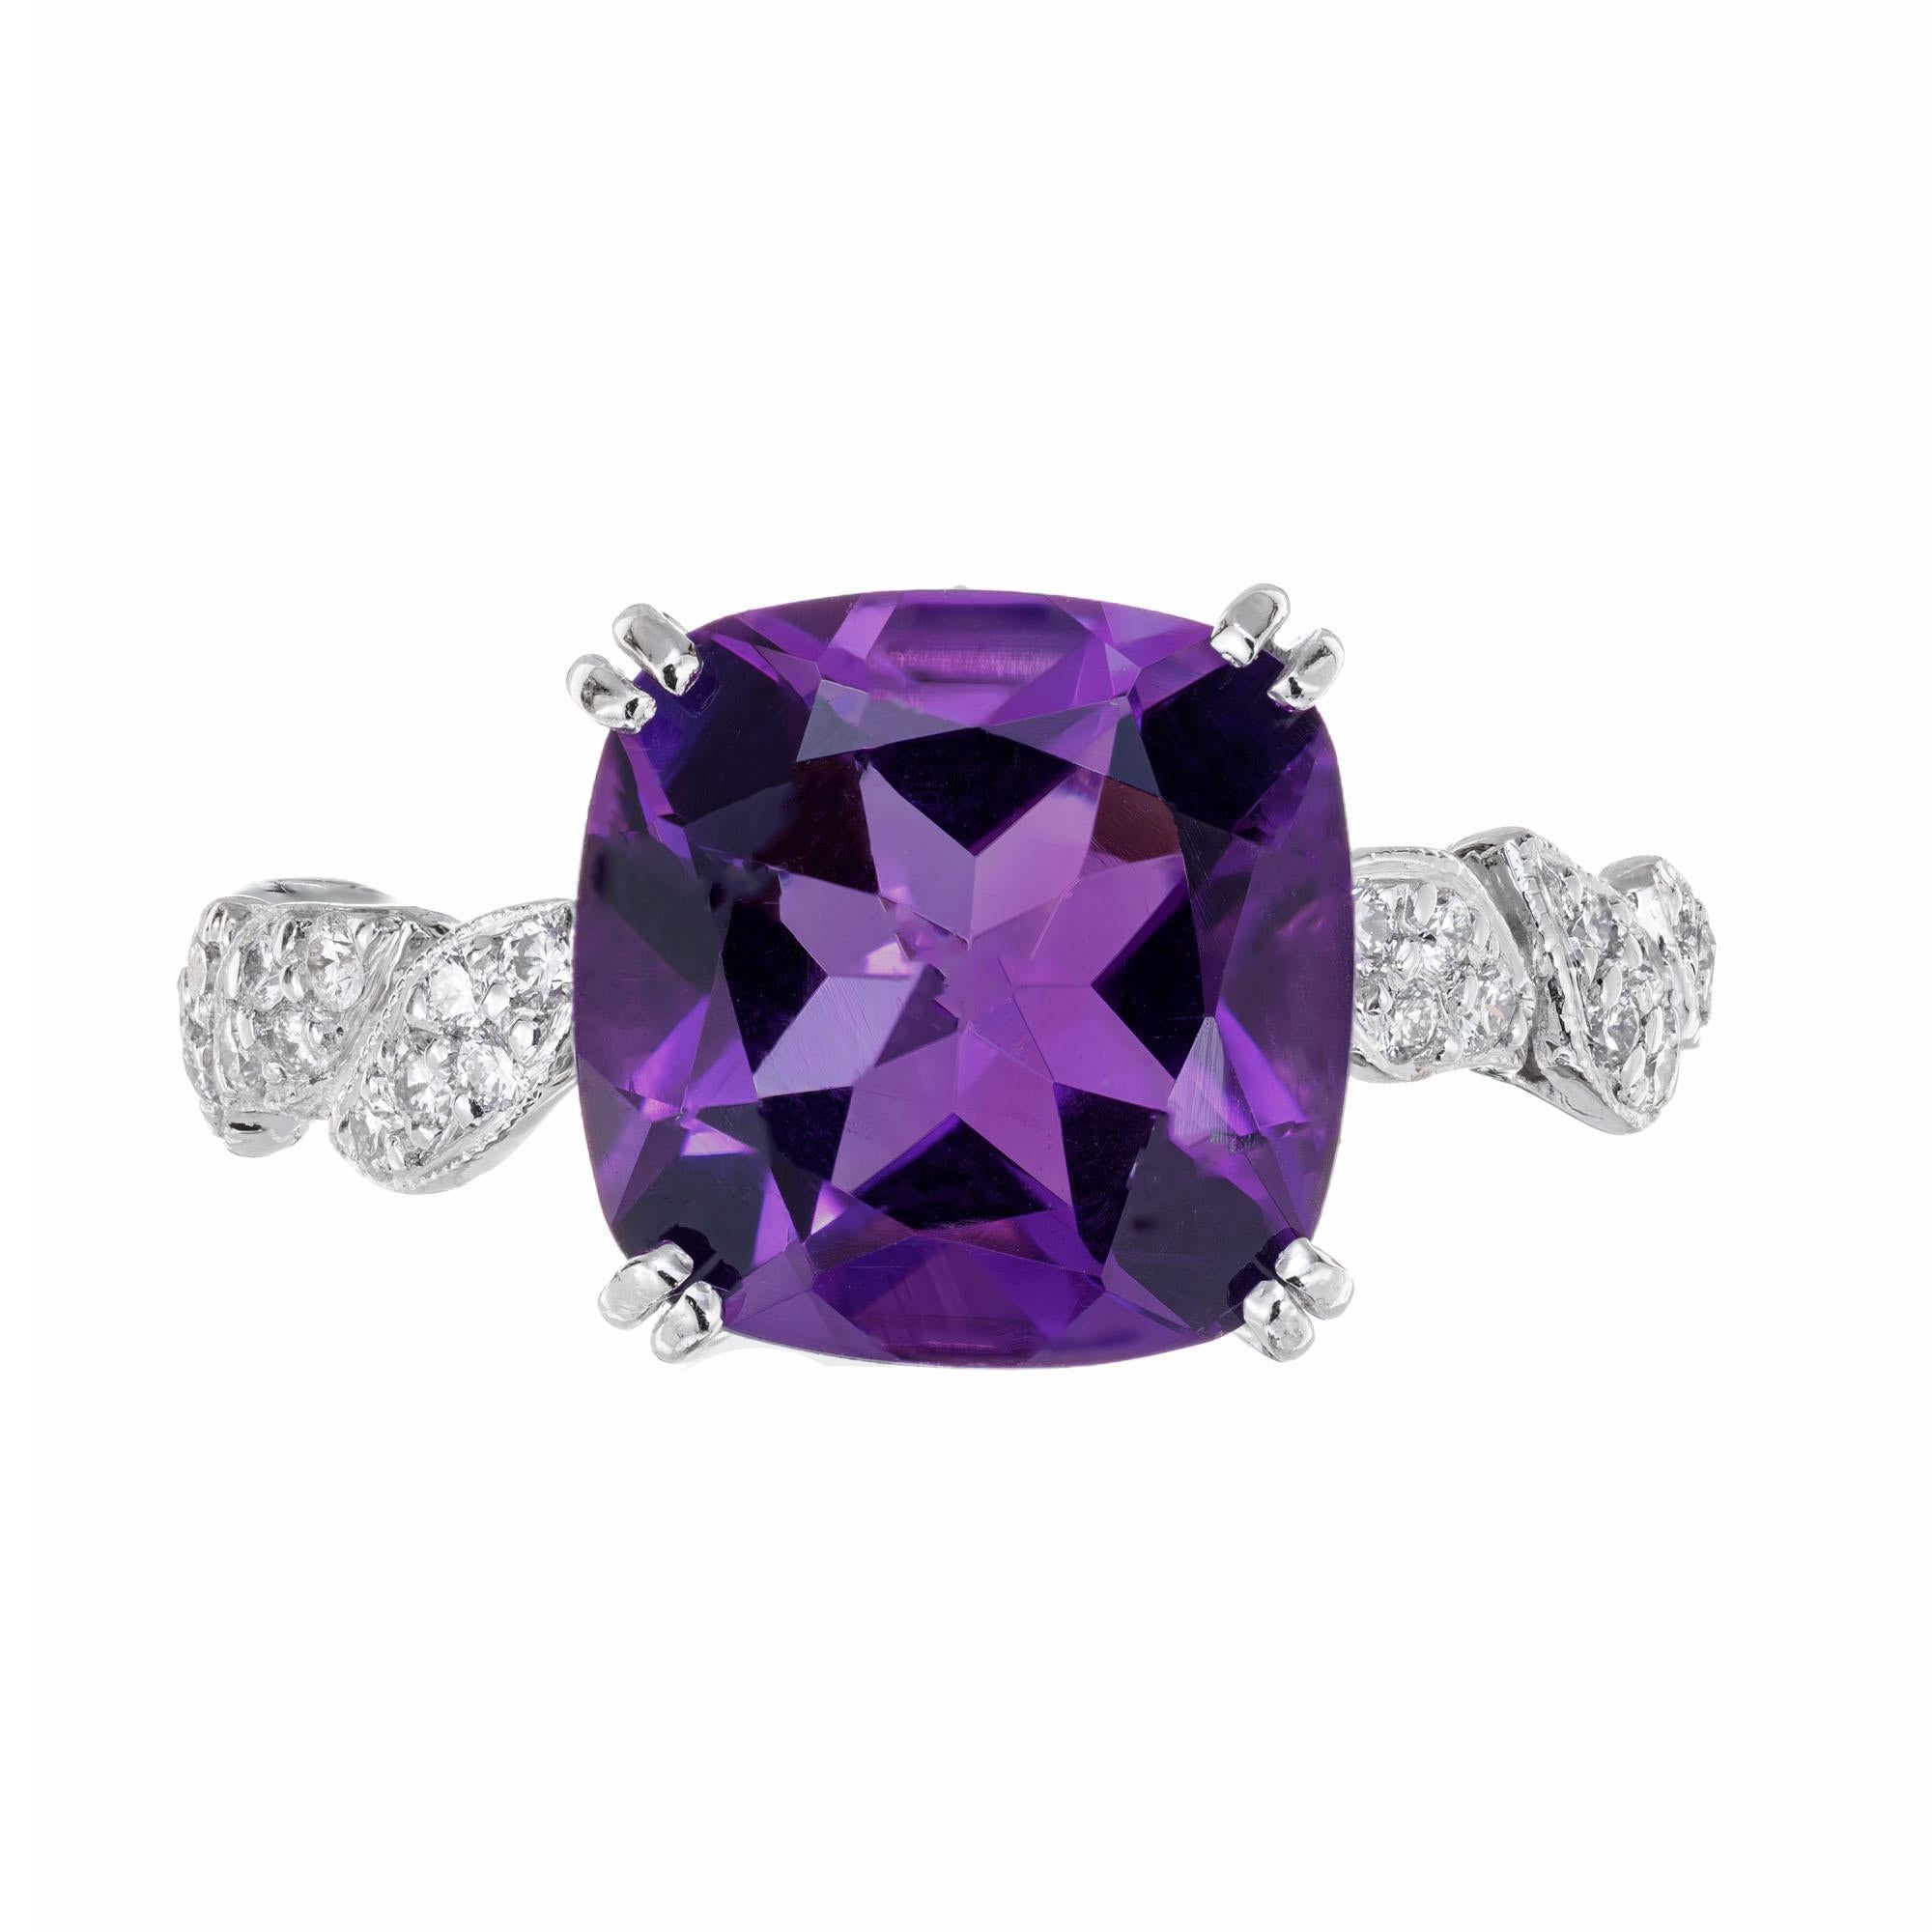 1990's amethyst and diamond ring. 4.66ct cushion cut Amethyst in a platinum setting with 28 round accent diamonds along both sides of the shank. The ring has a serial number. We do not know the maker. 

1 cushion cut deep purple Amethyst, approx.